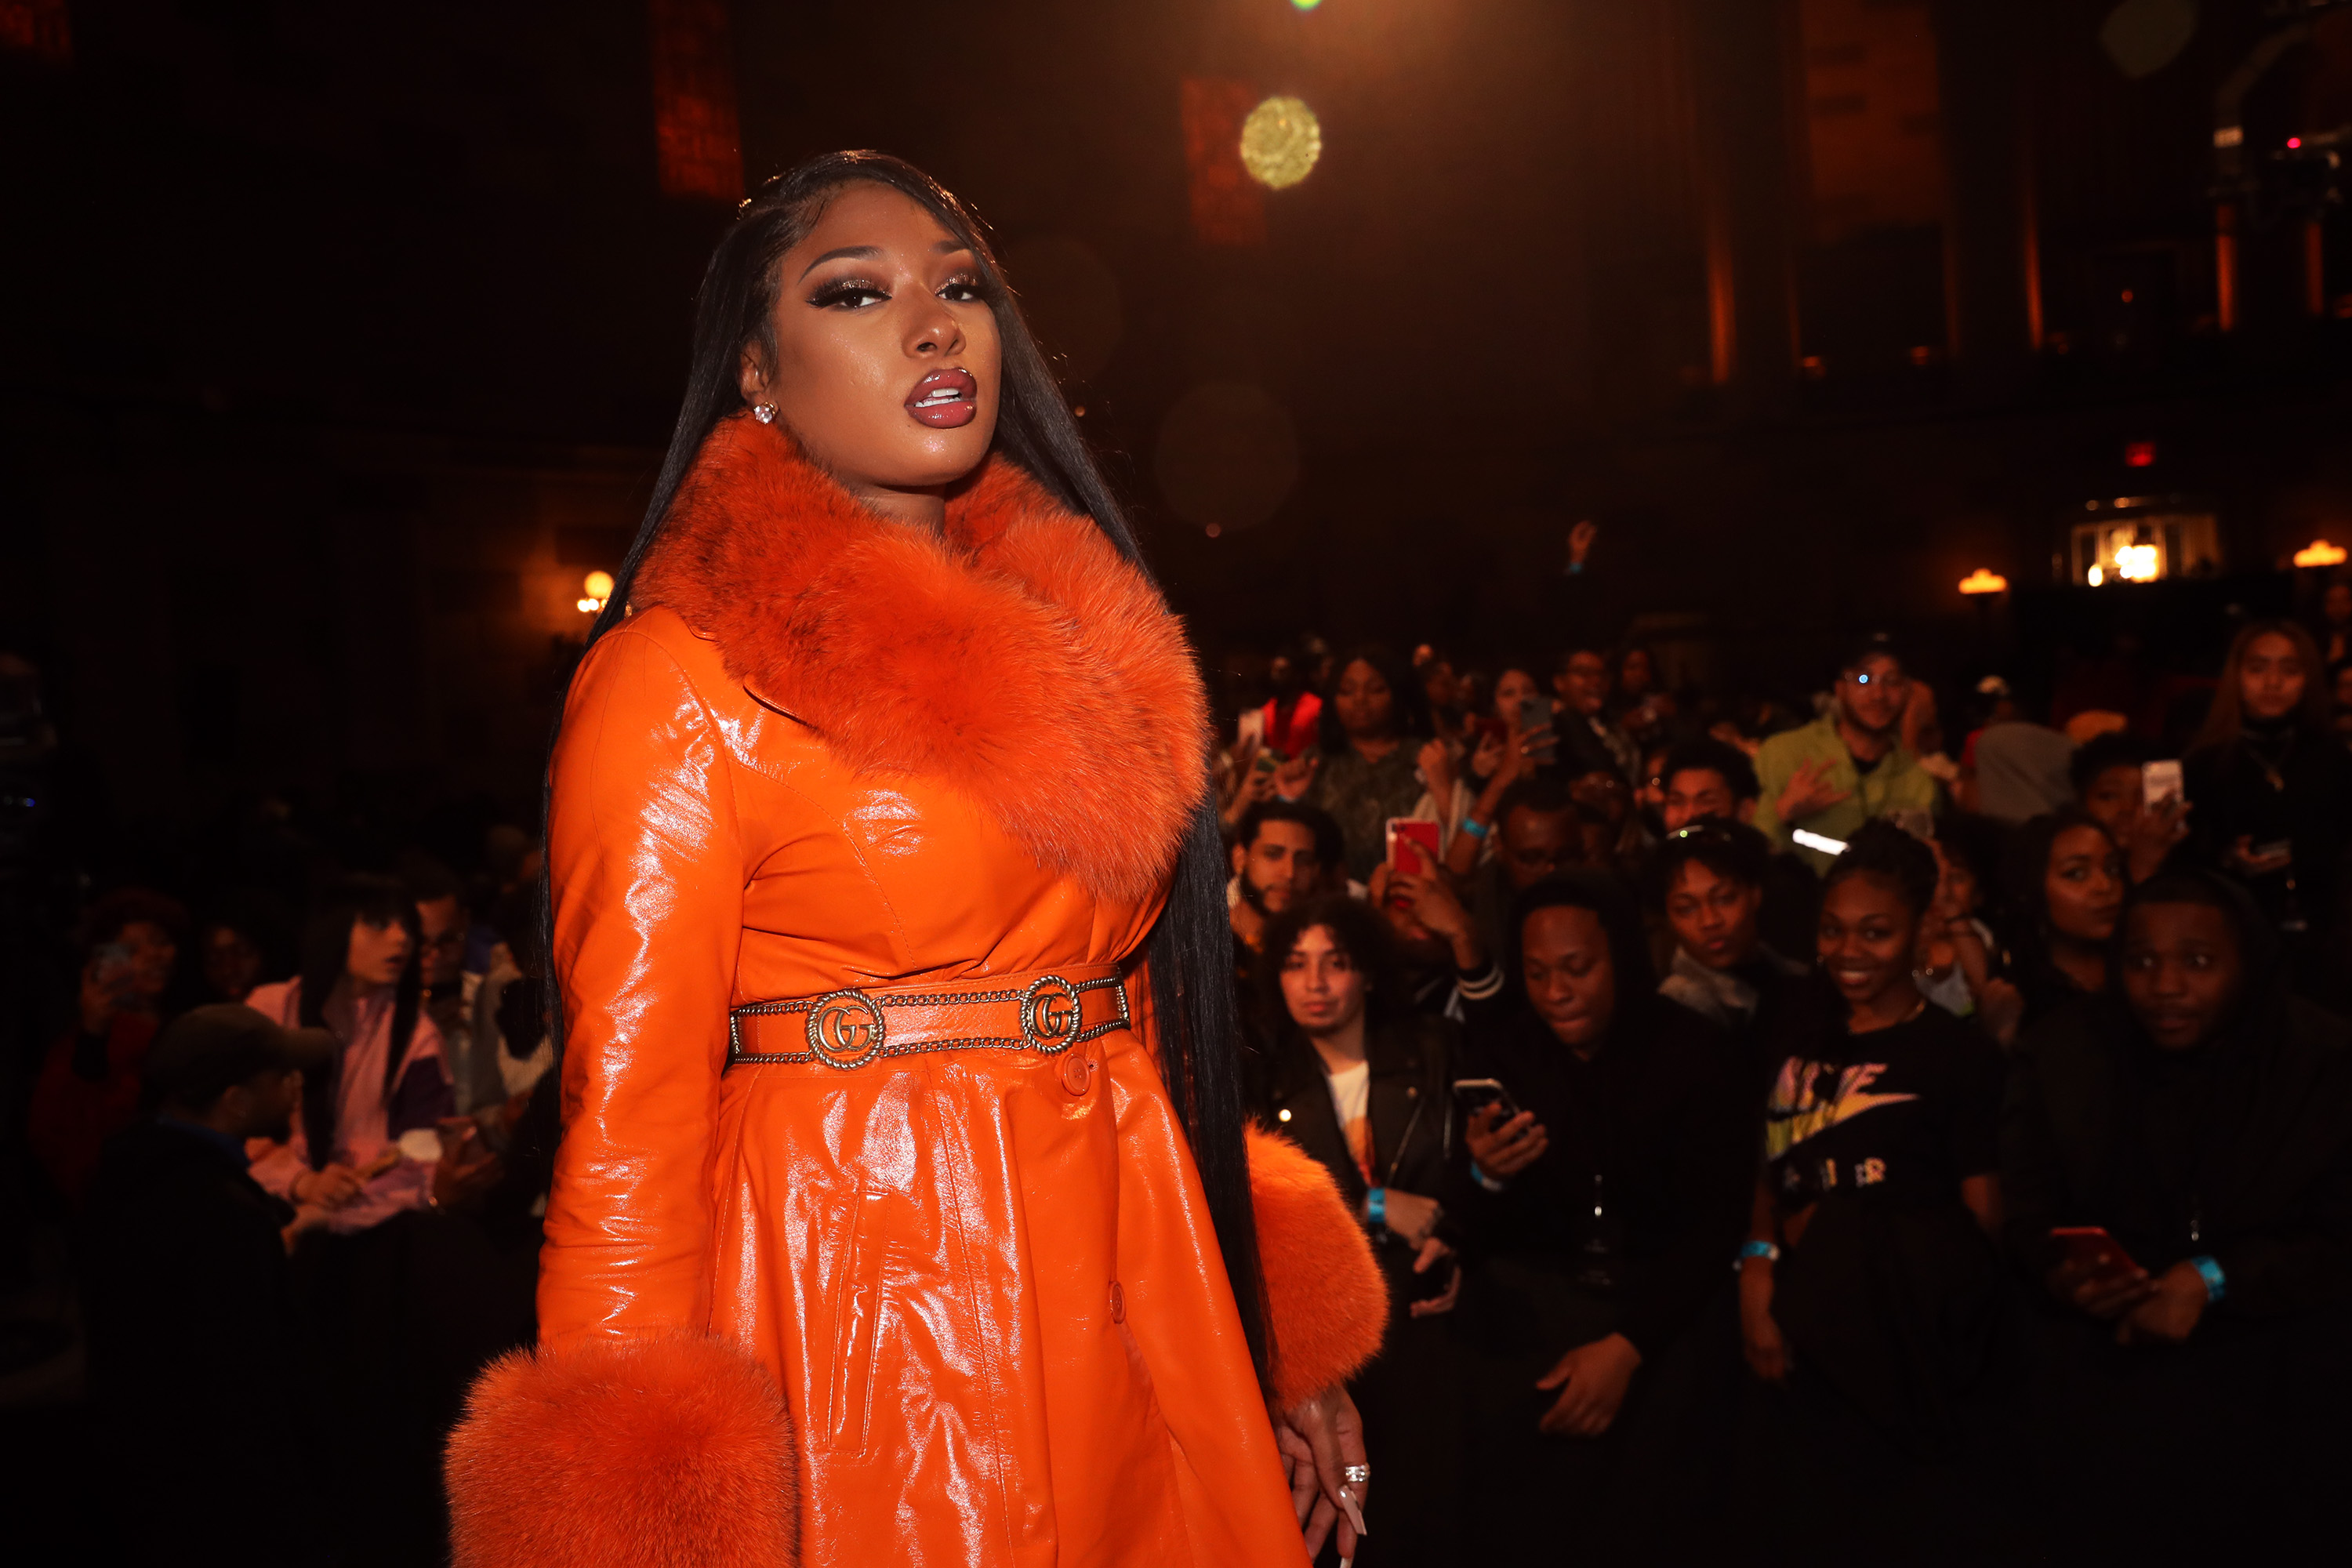 Recording artist Megan Thee Stallion appears onstage at #CRWN  A Conversation With Elliott Wilson And Megan Thee Stallion at Gotham Hall on March 10, 2020 in New York City | Johnny Nuñez/WireImage